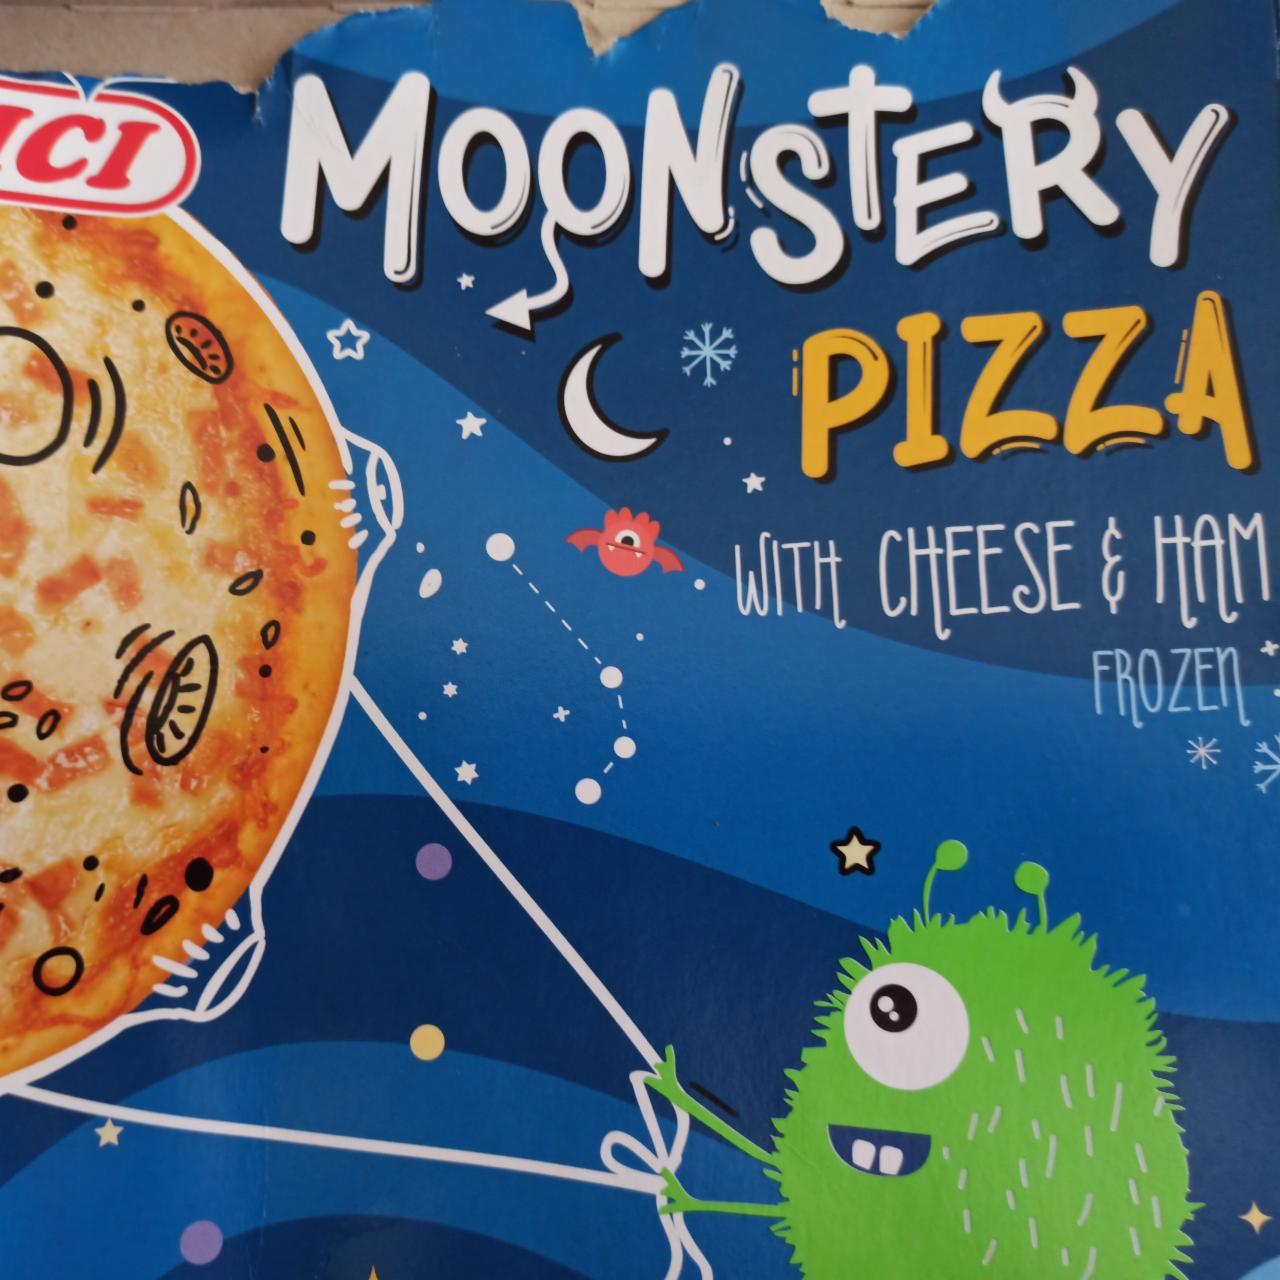 Fotografie - Moonstery pizza with cheee & ham Vici